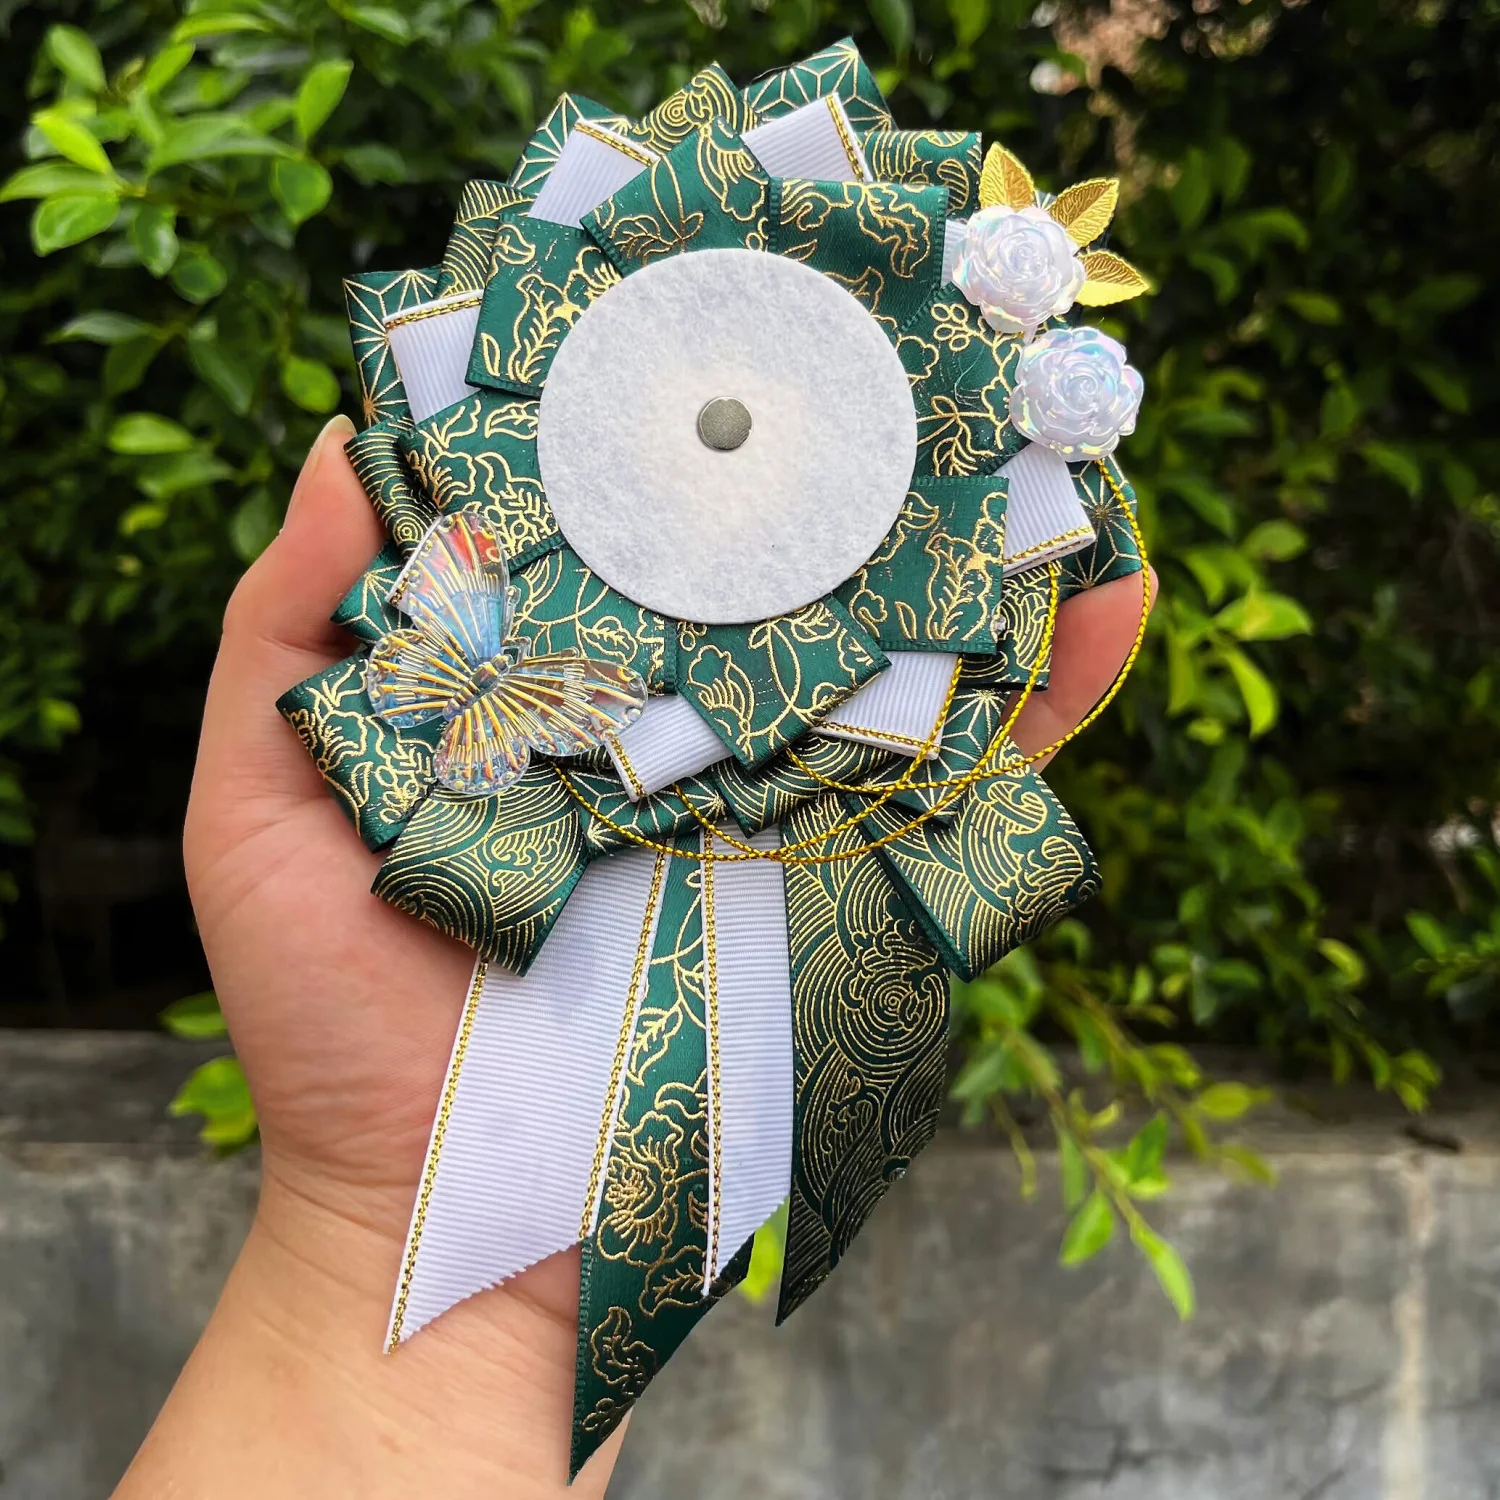 https://ae01.alicdn.com/kf/S79064e67dc9f4666bd4f96153fe0c098J/Green-Ribbon-Cosplay-Ita-Bags-Rosette-Protection-Flower-Pin-Holder-58mm-Badge-Accessories-Fill-Tray-Base.jpg